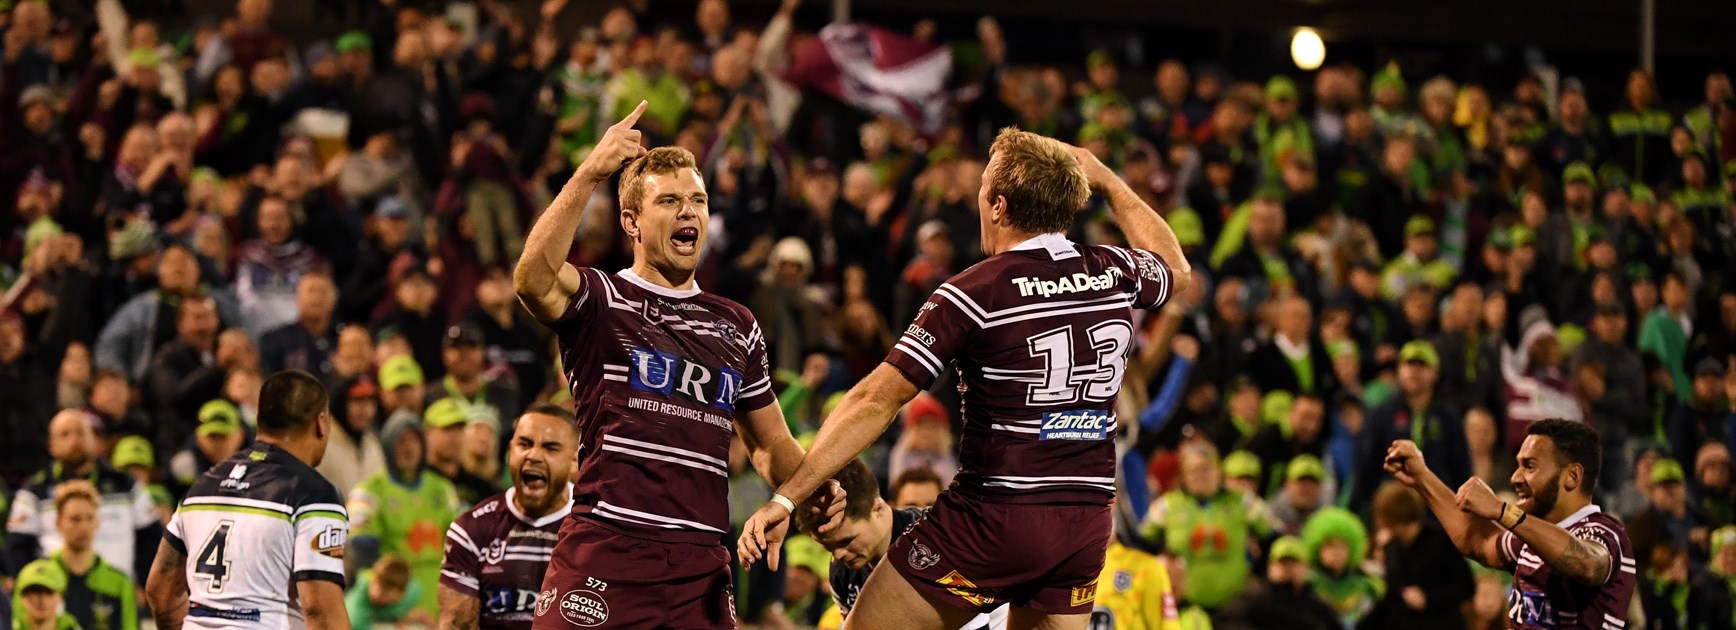 Trbojevic brothers set to stay at Manly on lucrative six-year deals